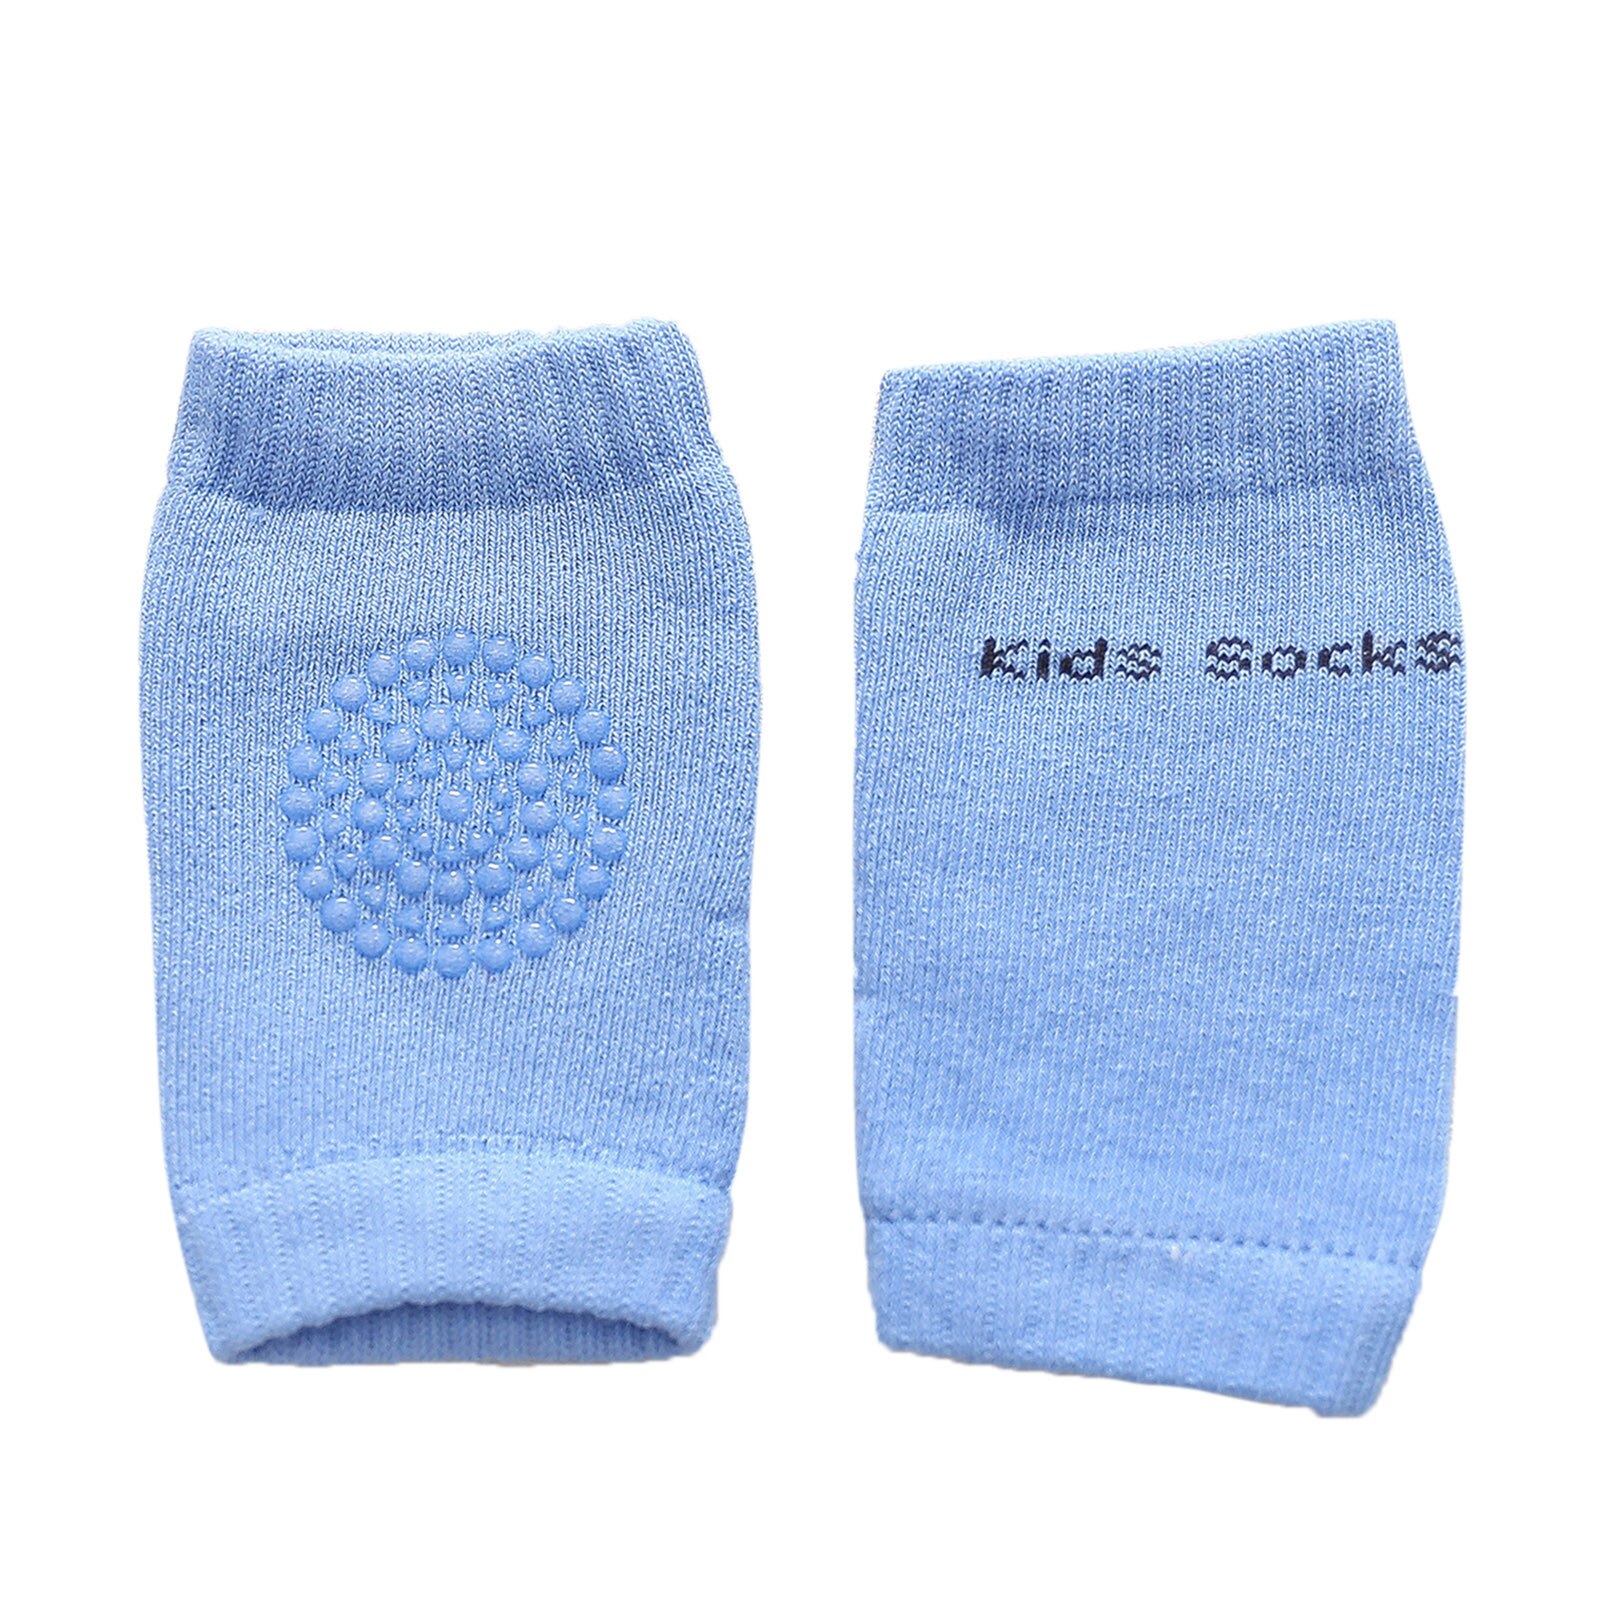 1 Pair Cozy Baby knee pad kids safety crawling elbow cushion infant toddlers baby leg warmer Knee Support Protector 2022: G